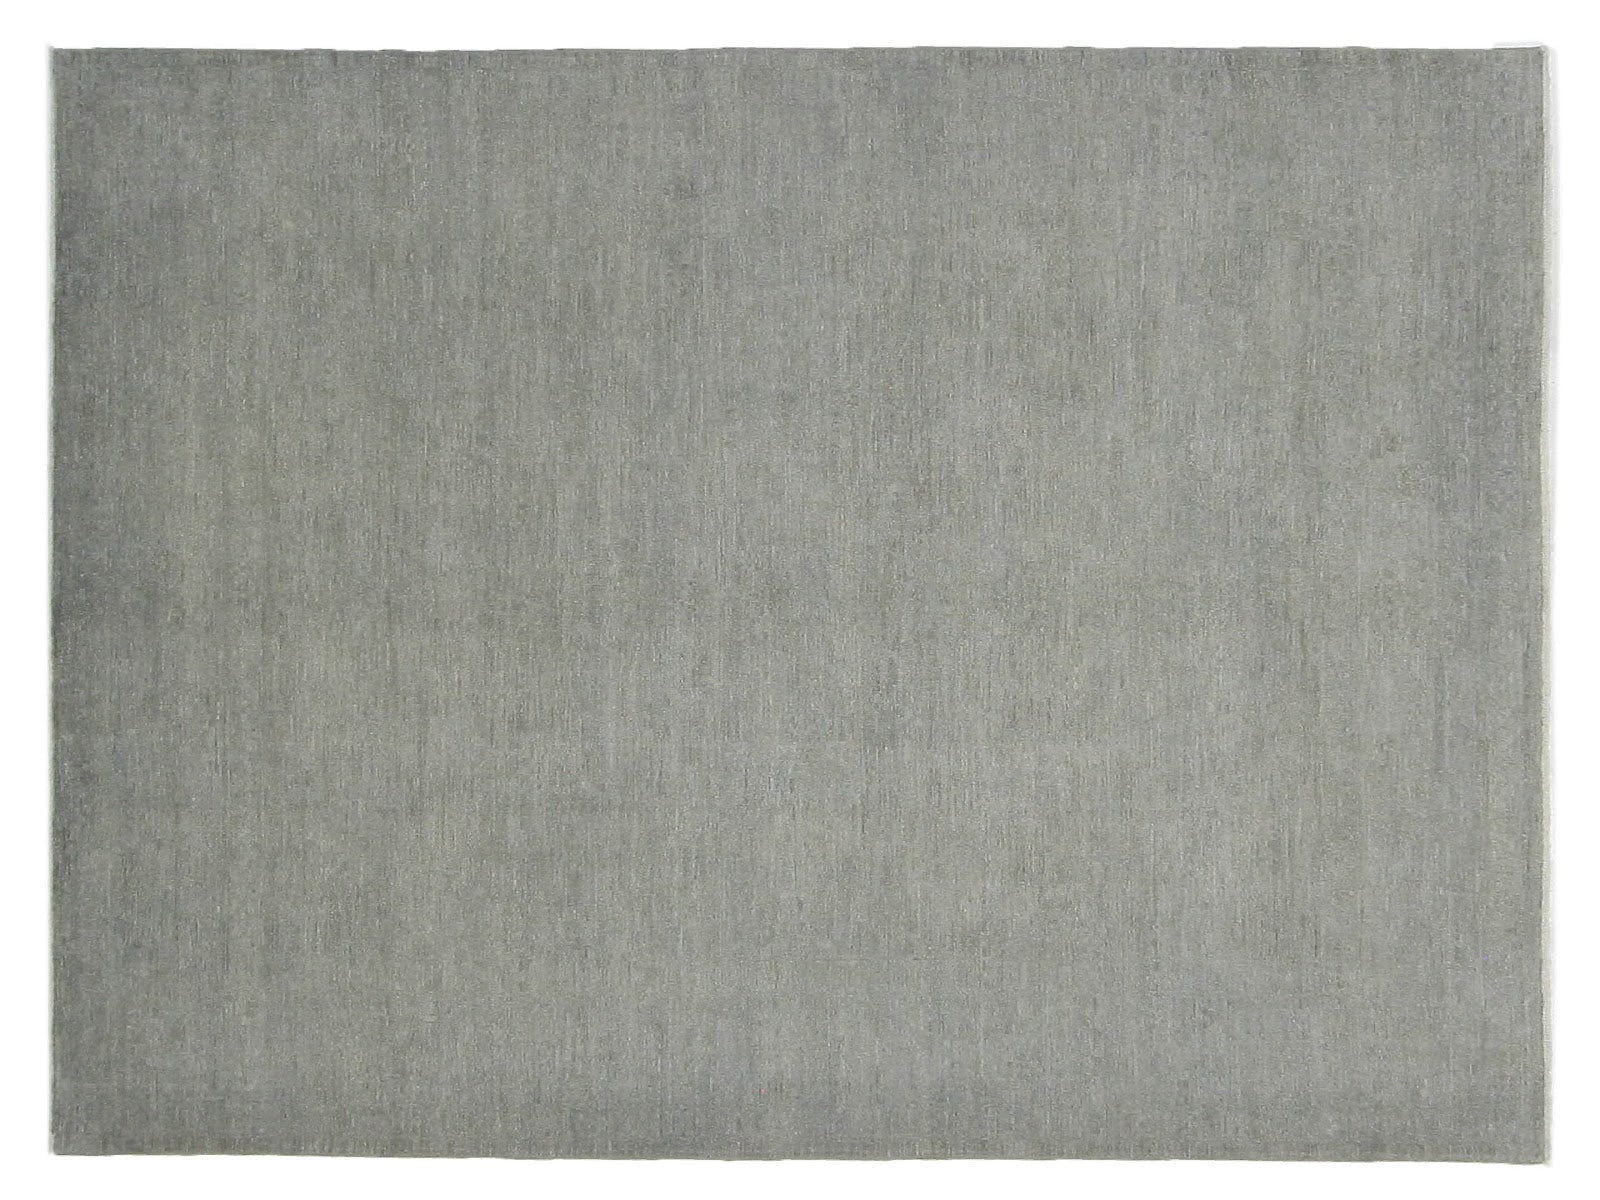 8x10 hand-knotted wool rug overdyed in a uniform shade of gray, perfect for transitional and modern interiors